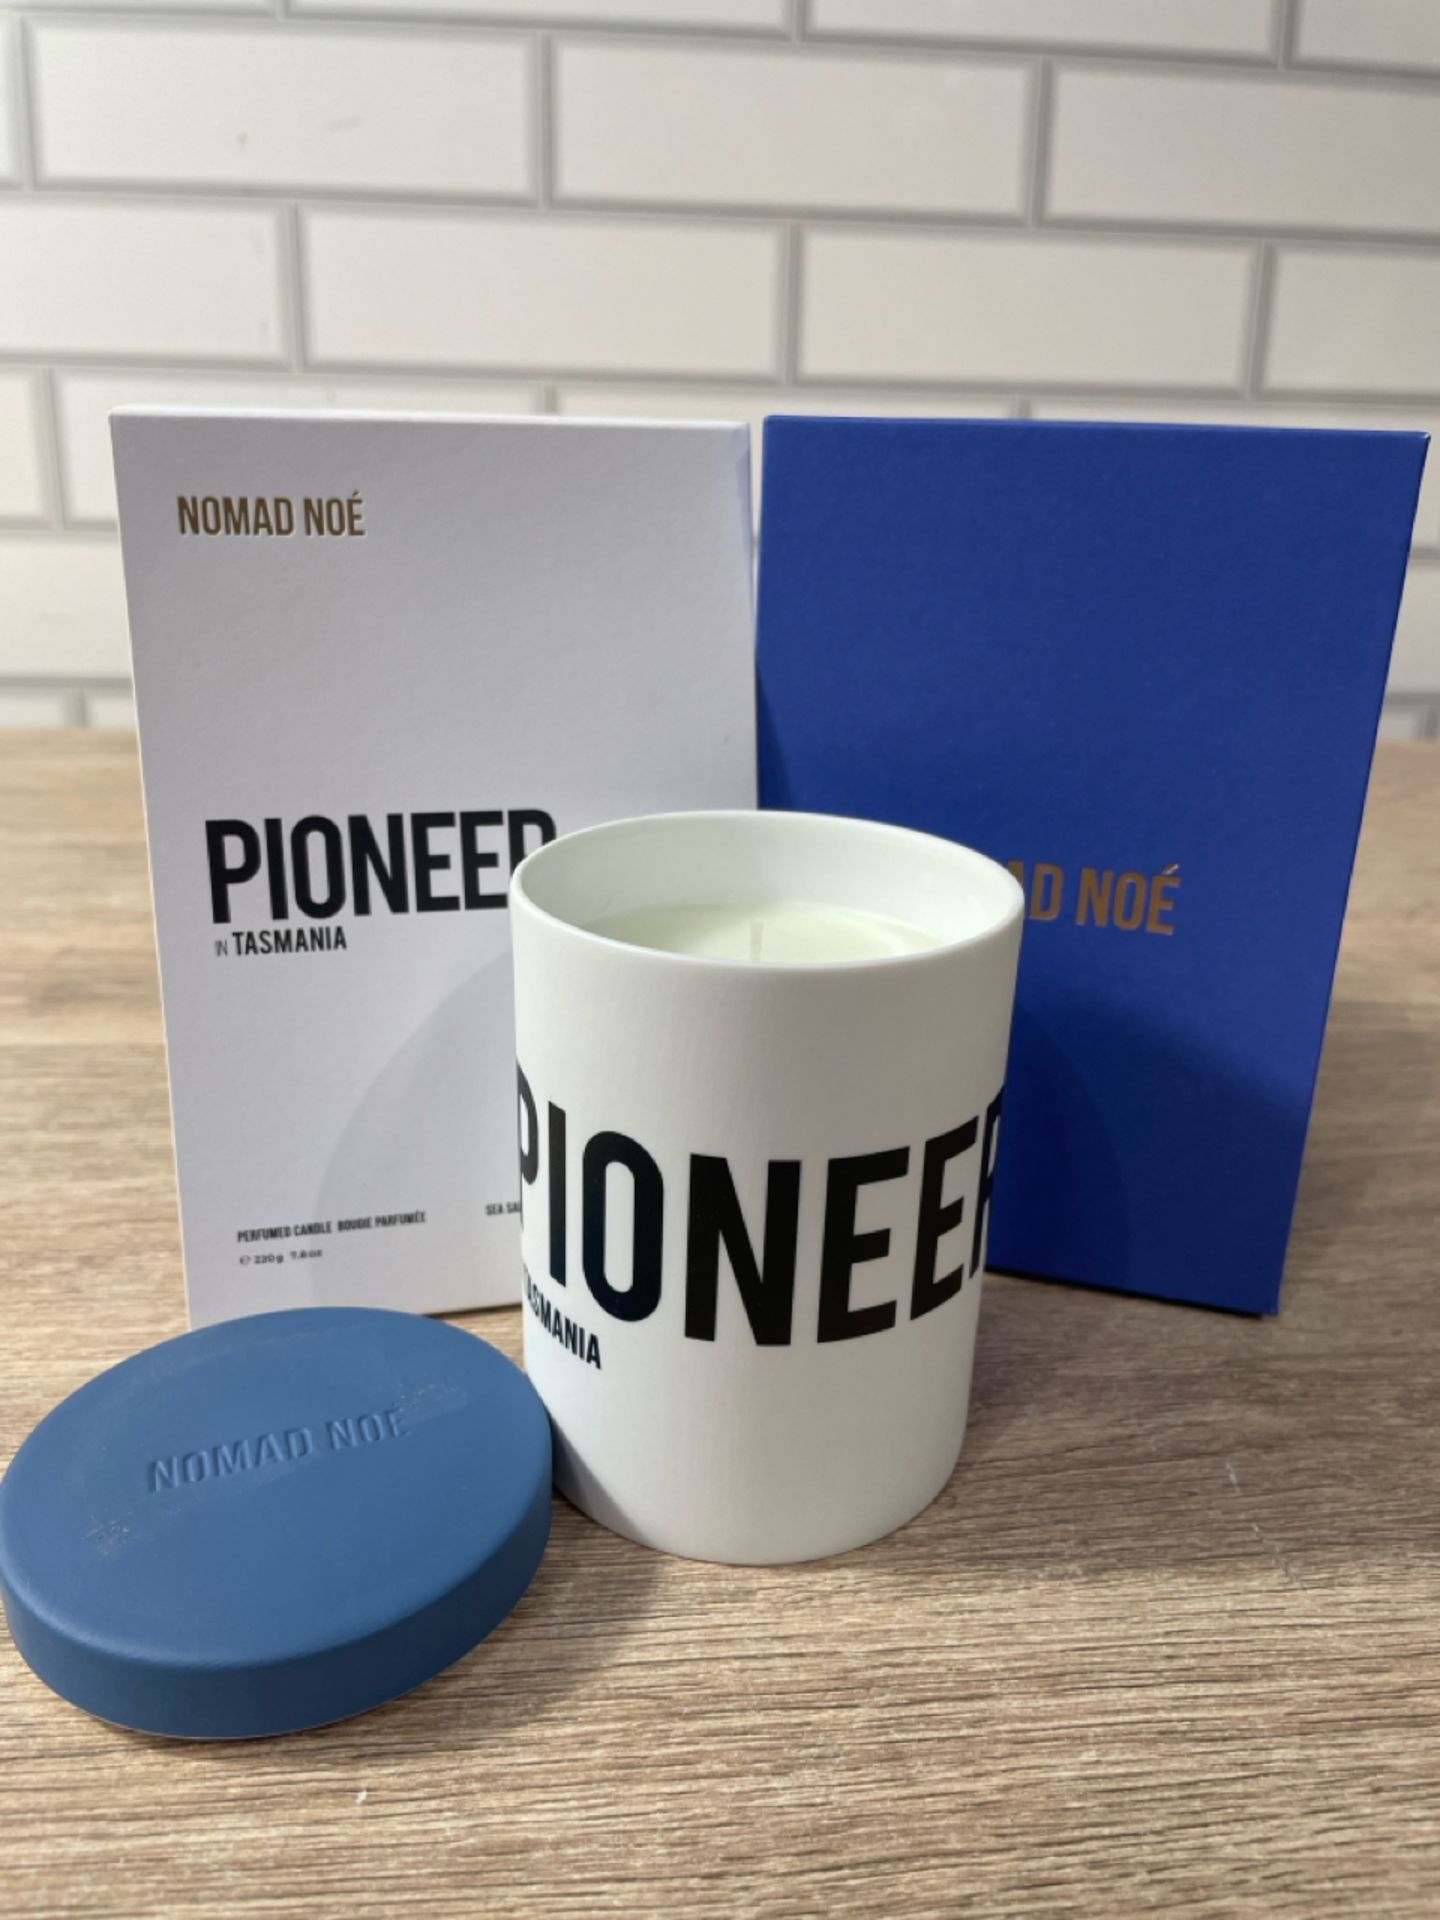 Pioneer Scented Candle from Nomad Noe - Image 3 of 4